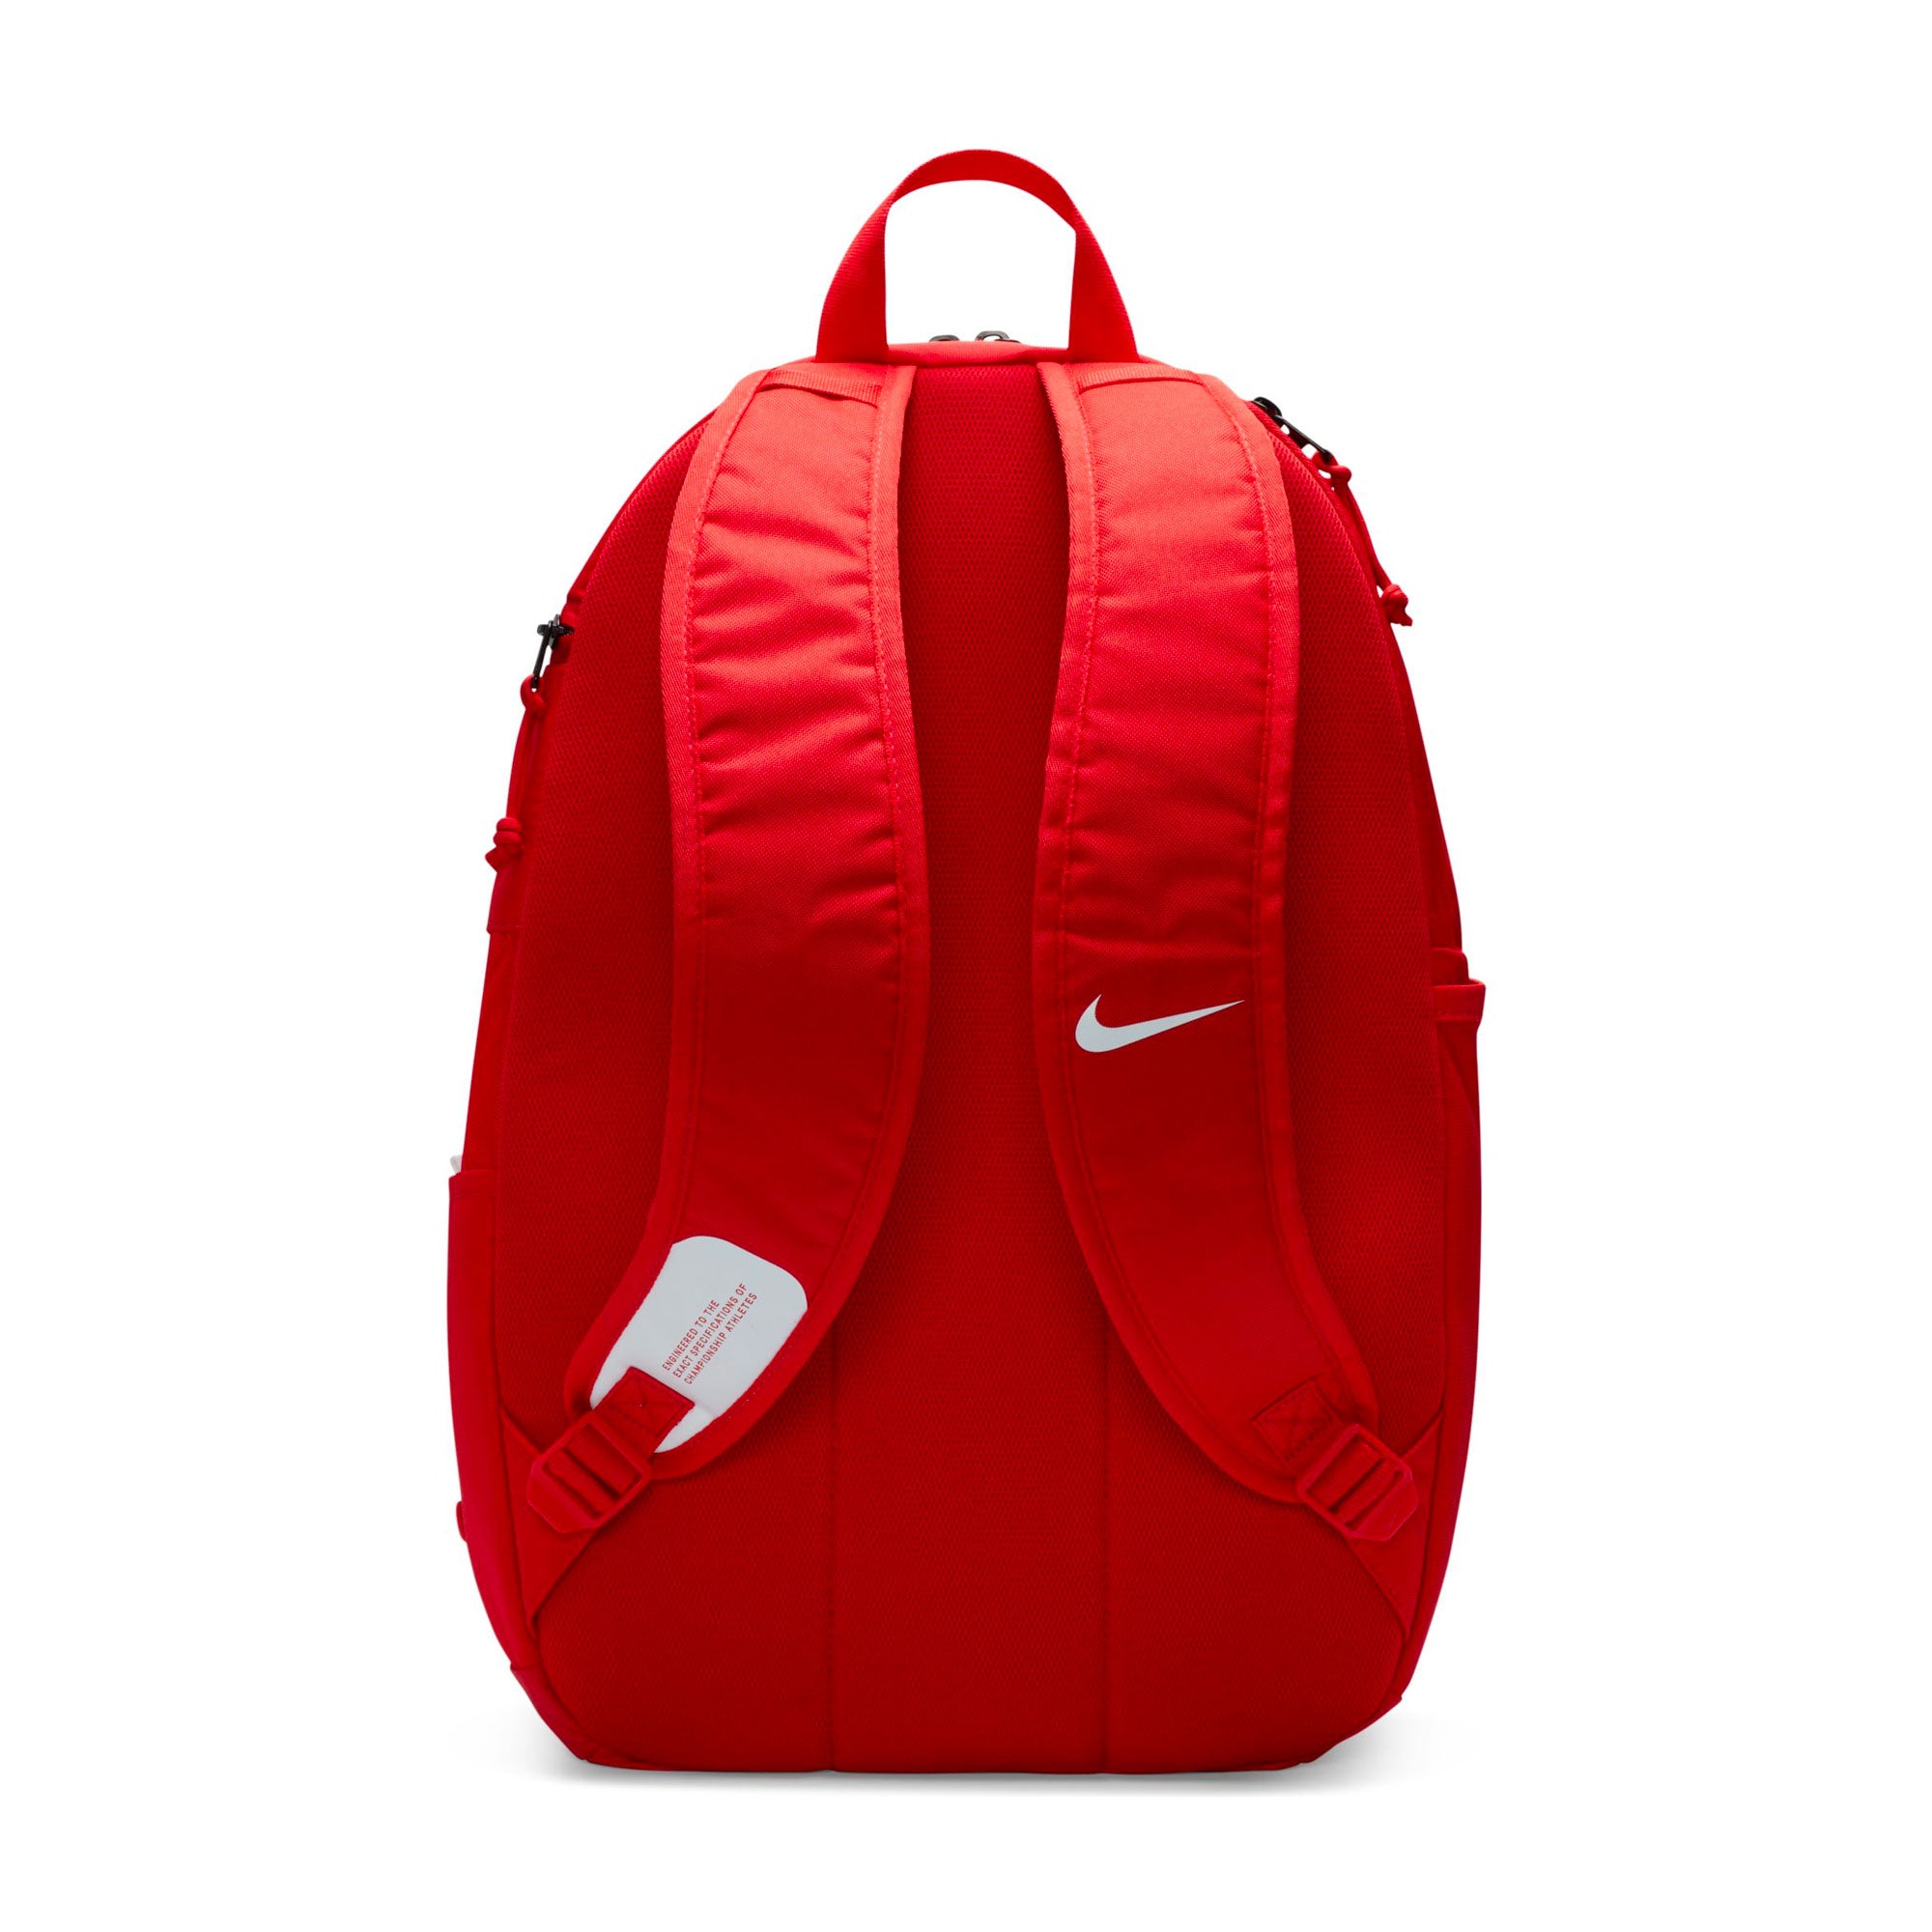 Nike Boot Bag - The Ref Stop